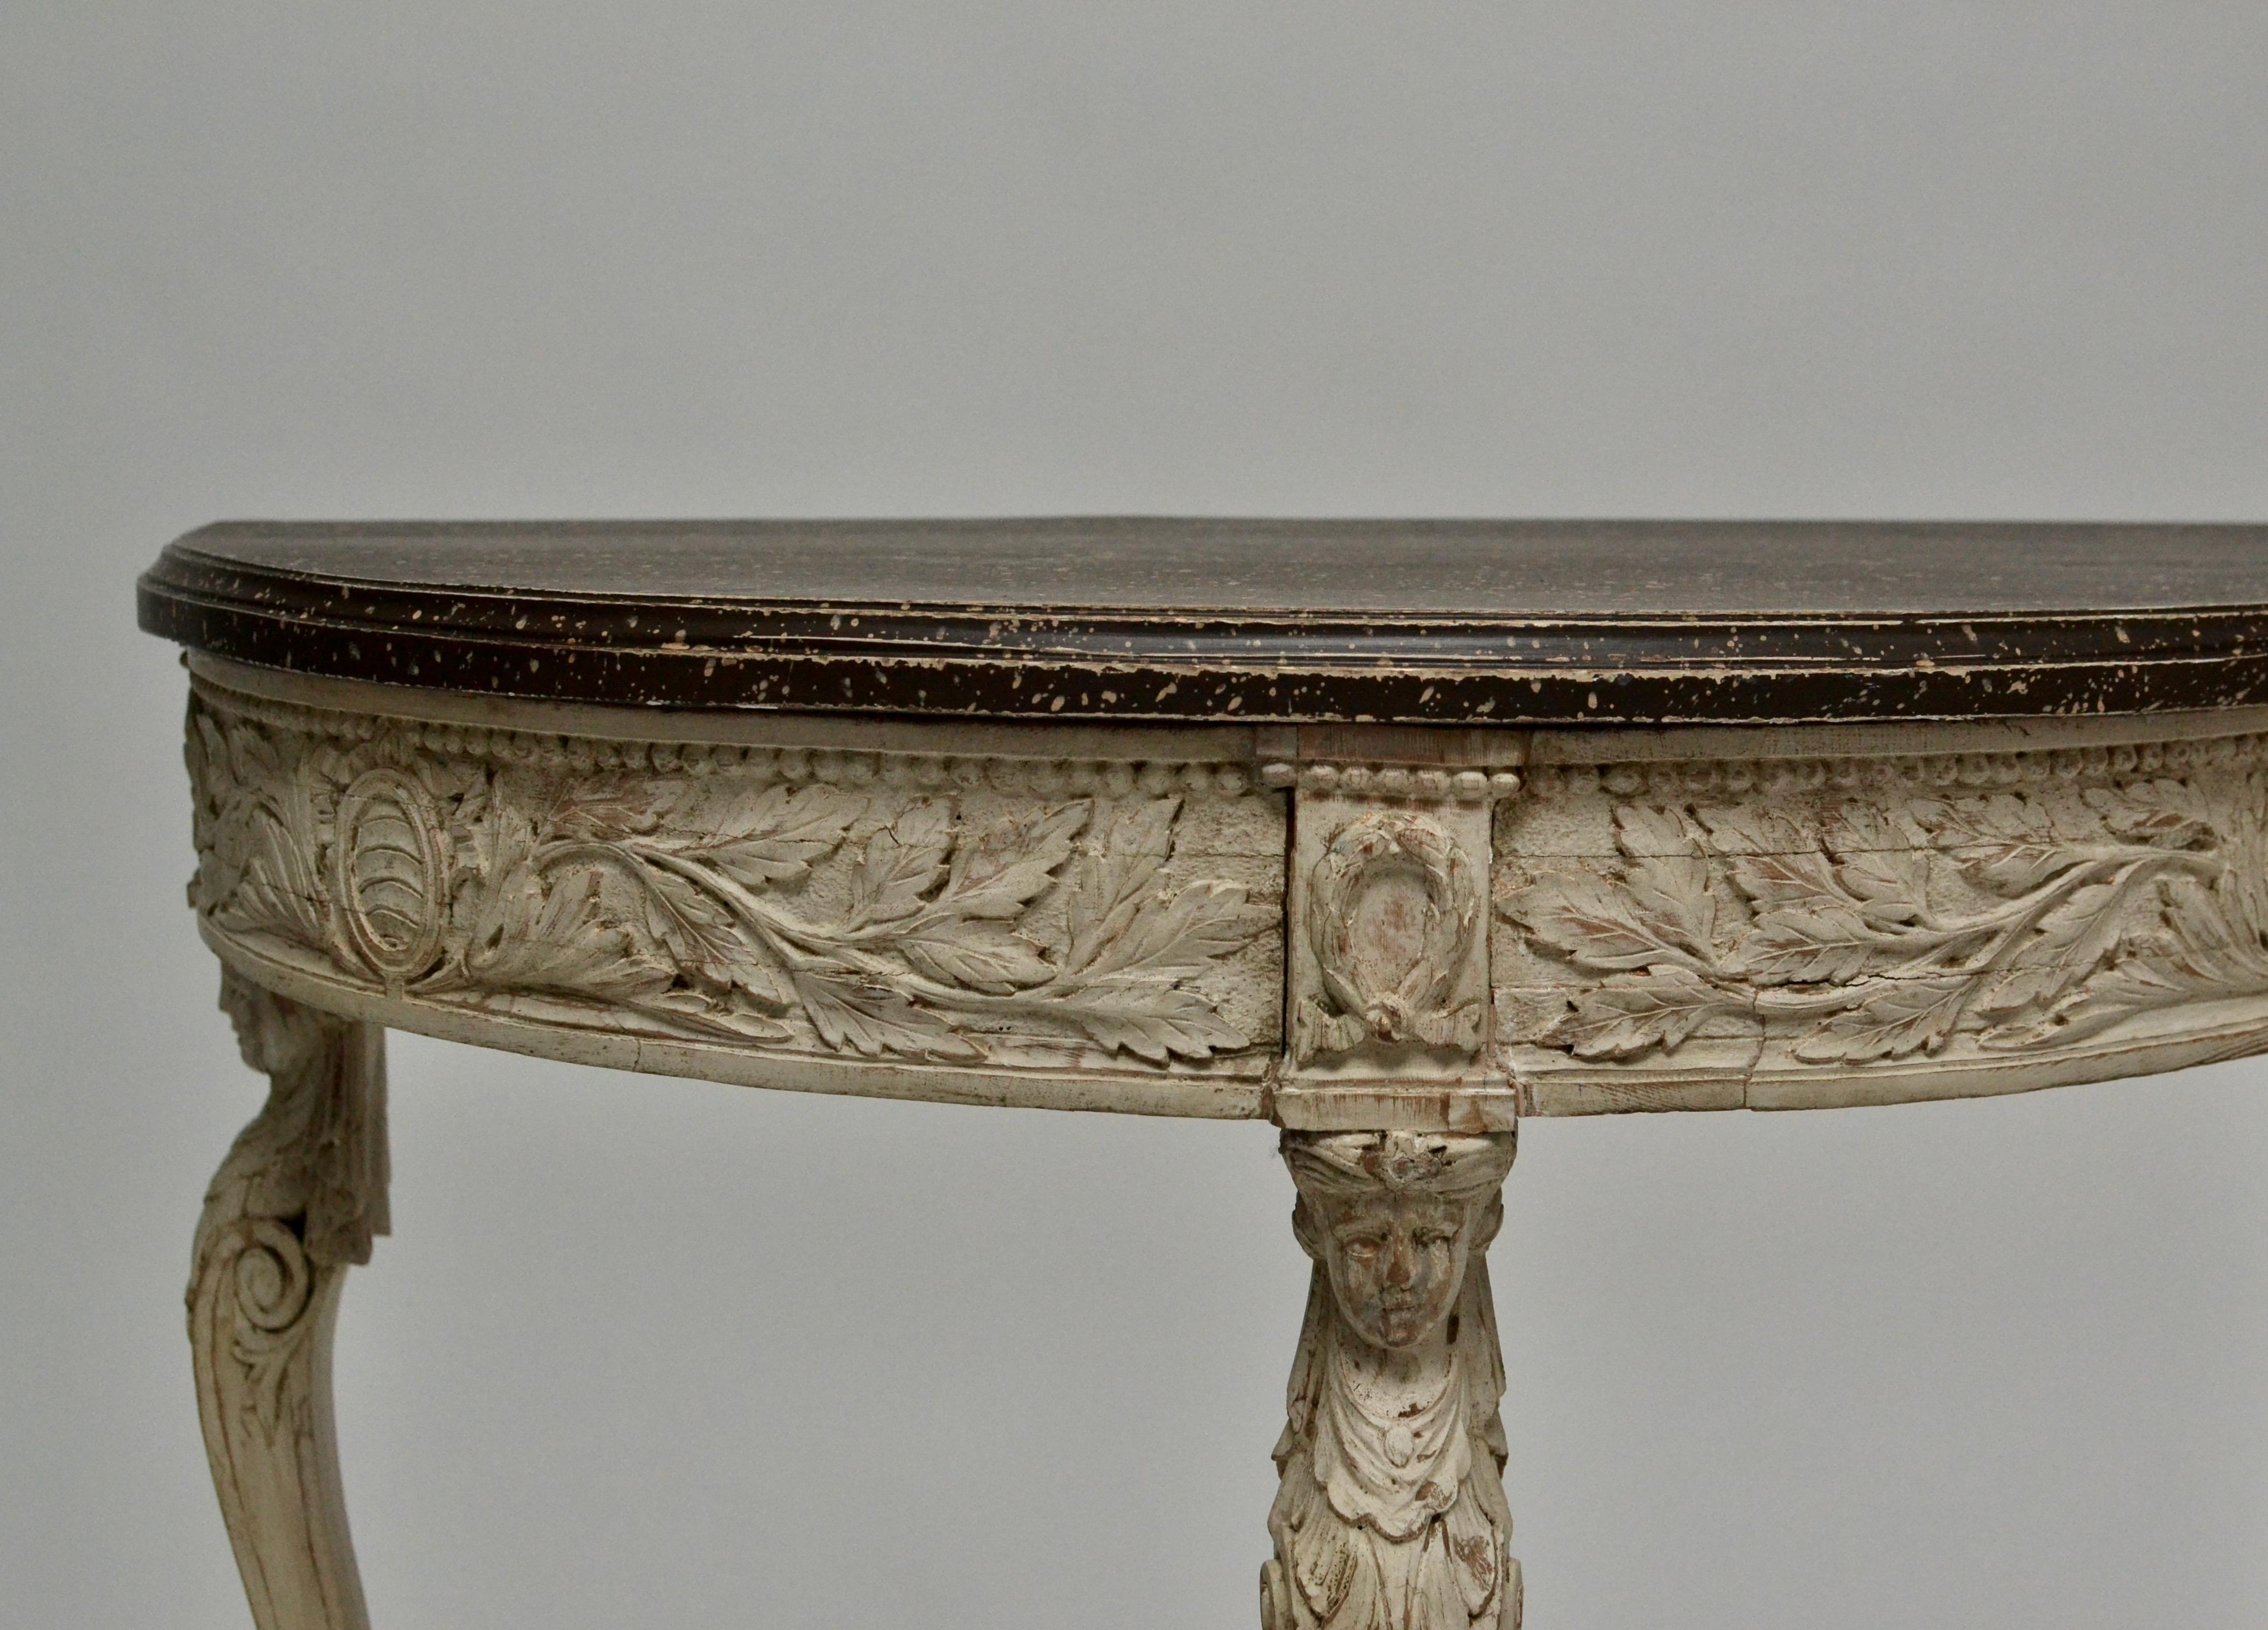 Early 19th Century Gustavian Console Table with a Faux Porphyry Painted Top